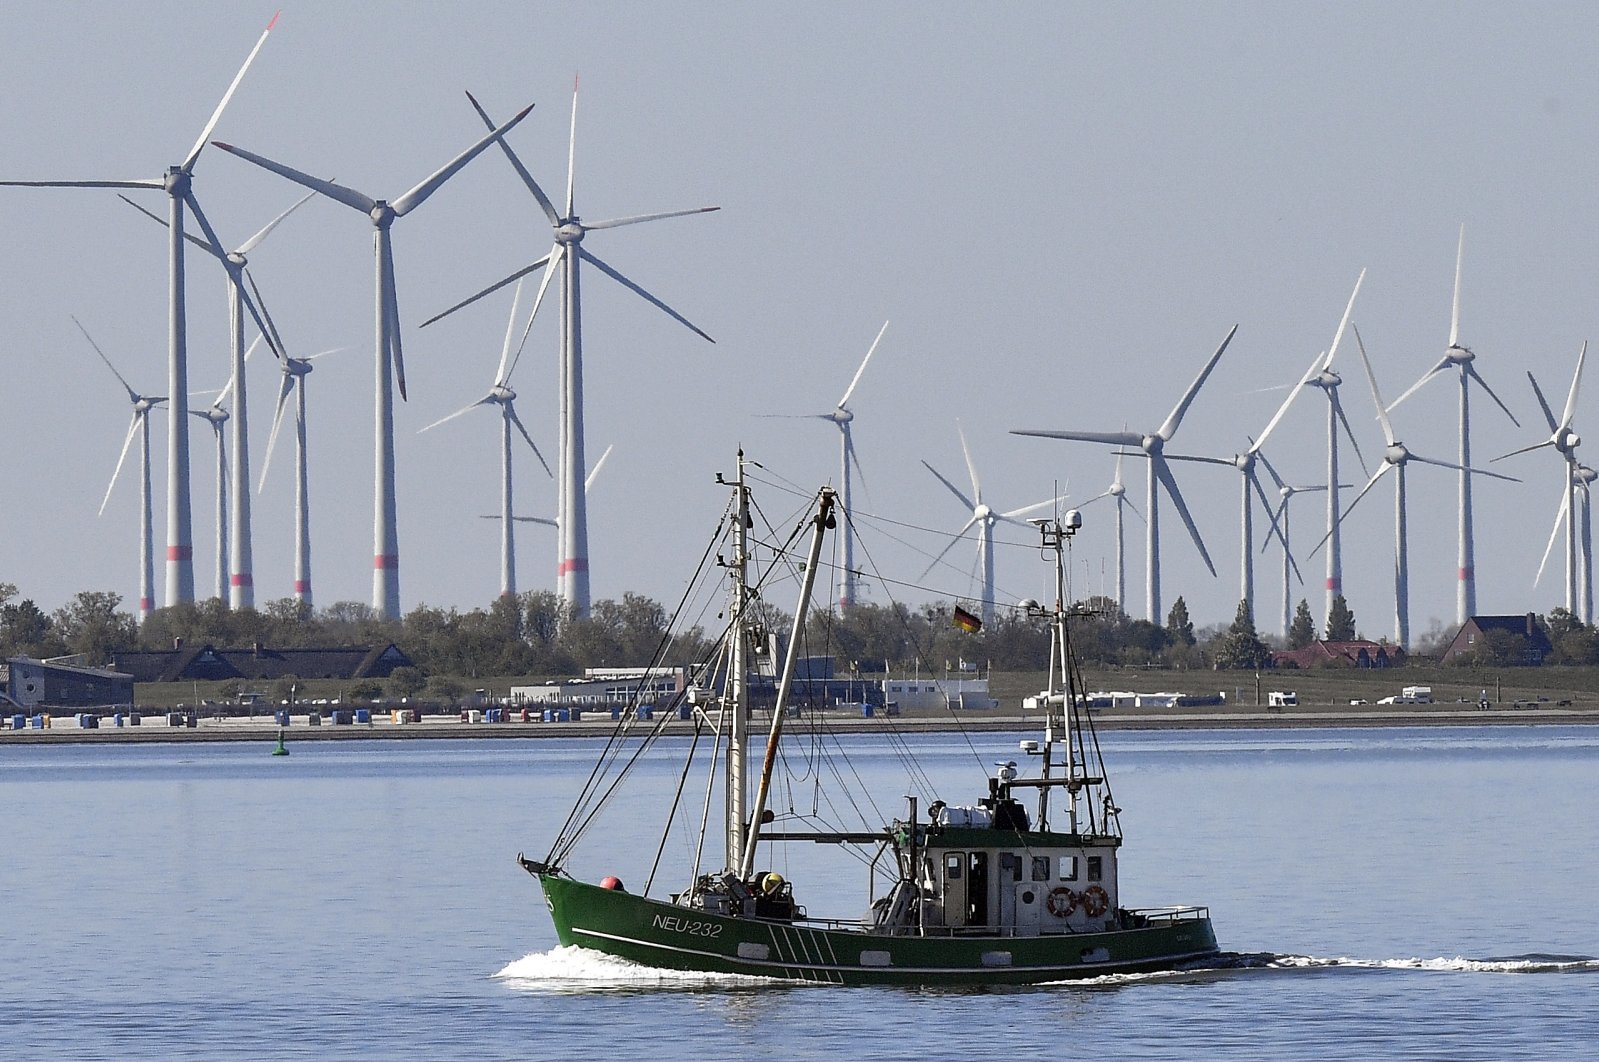 A fishing boat passes wind turbines between the Langeoog and Bensersiel islands on the North Sea coast in Germany, May 15, 2019. (AP Photo)